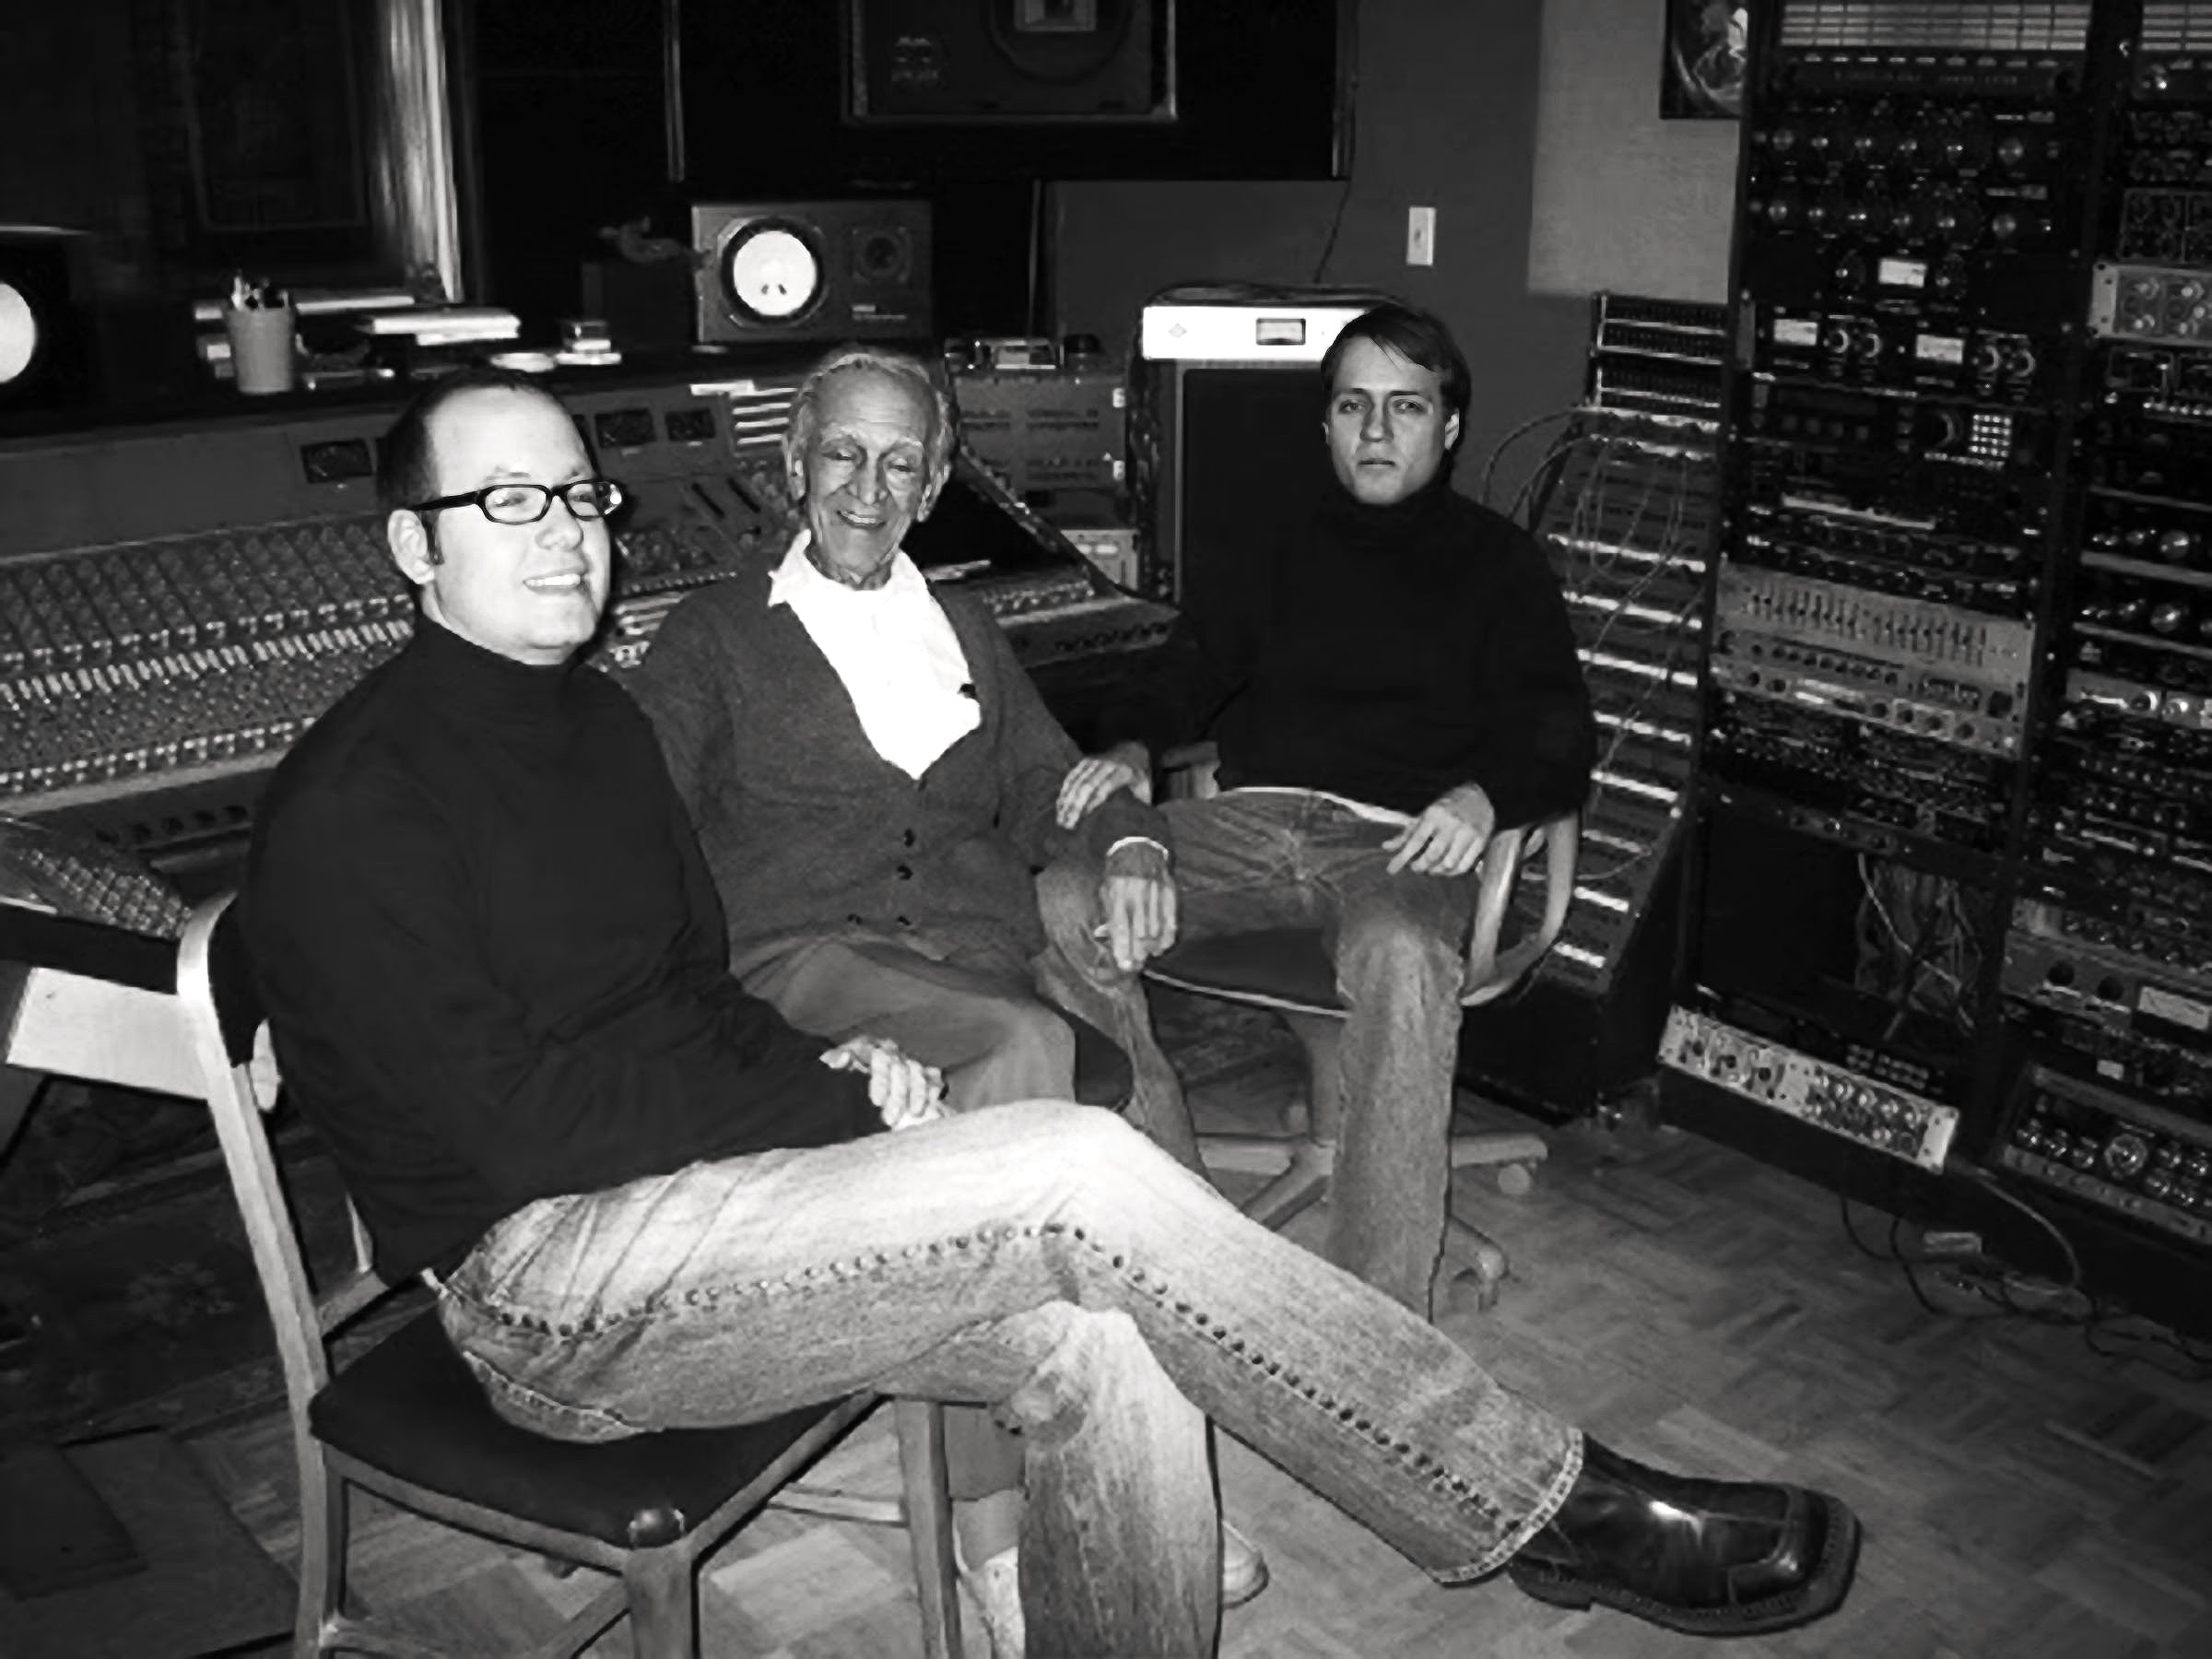  With Joel Mellin and my grandfather, Pete Rizza, Sr. at Zippah Recording, circa 2005. 